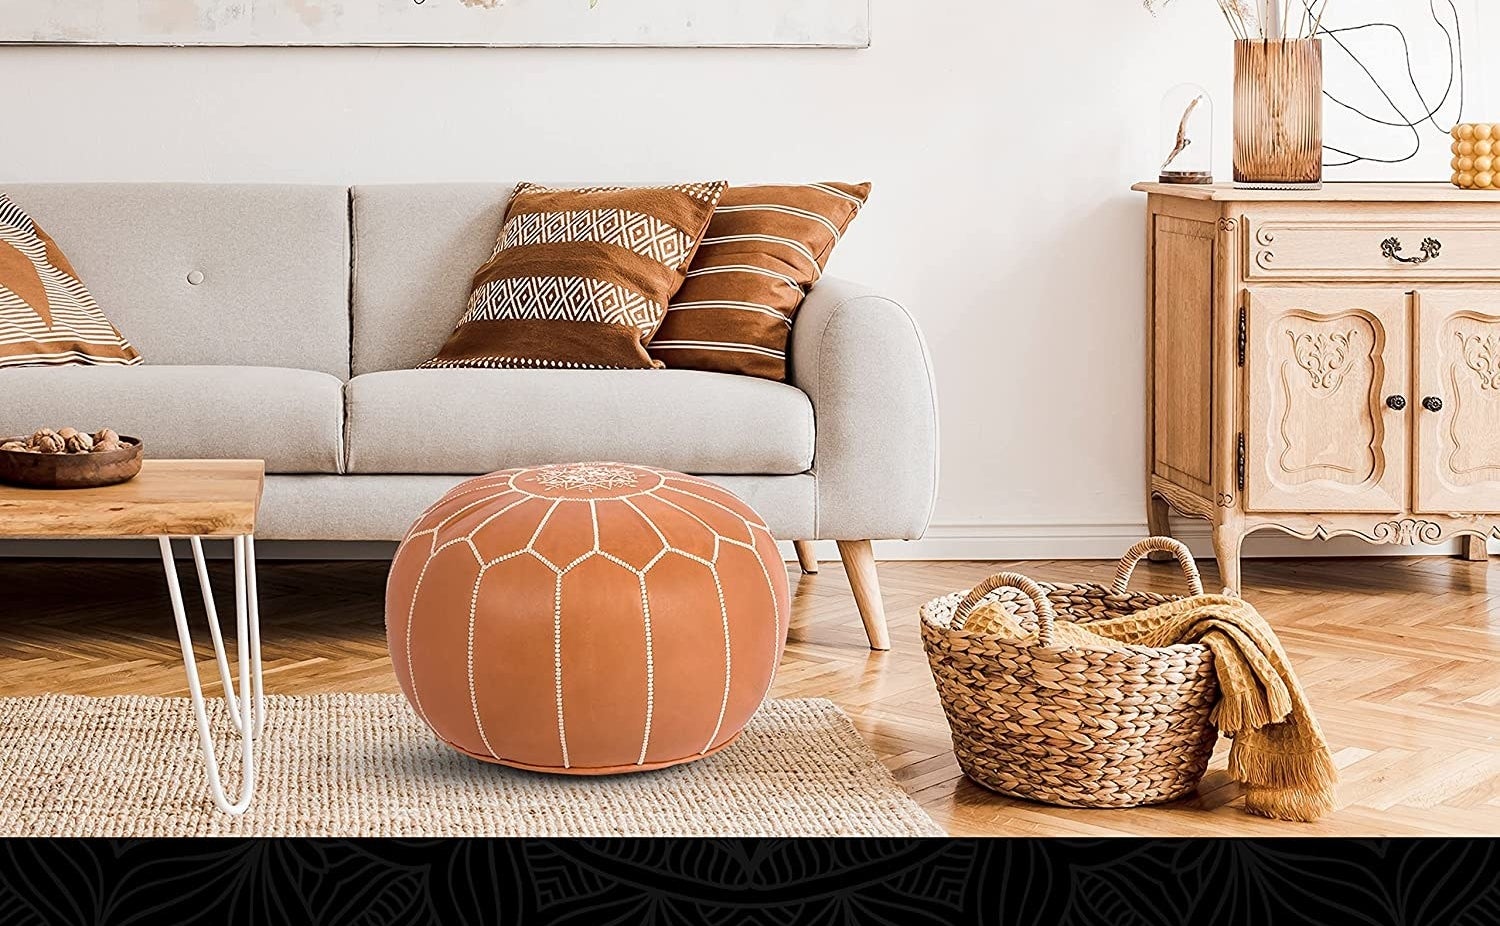 the pouf in a living room by a couch and basket